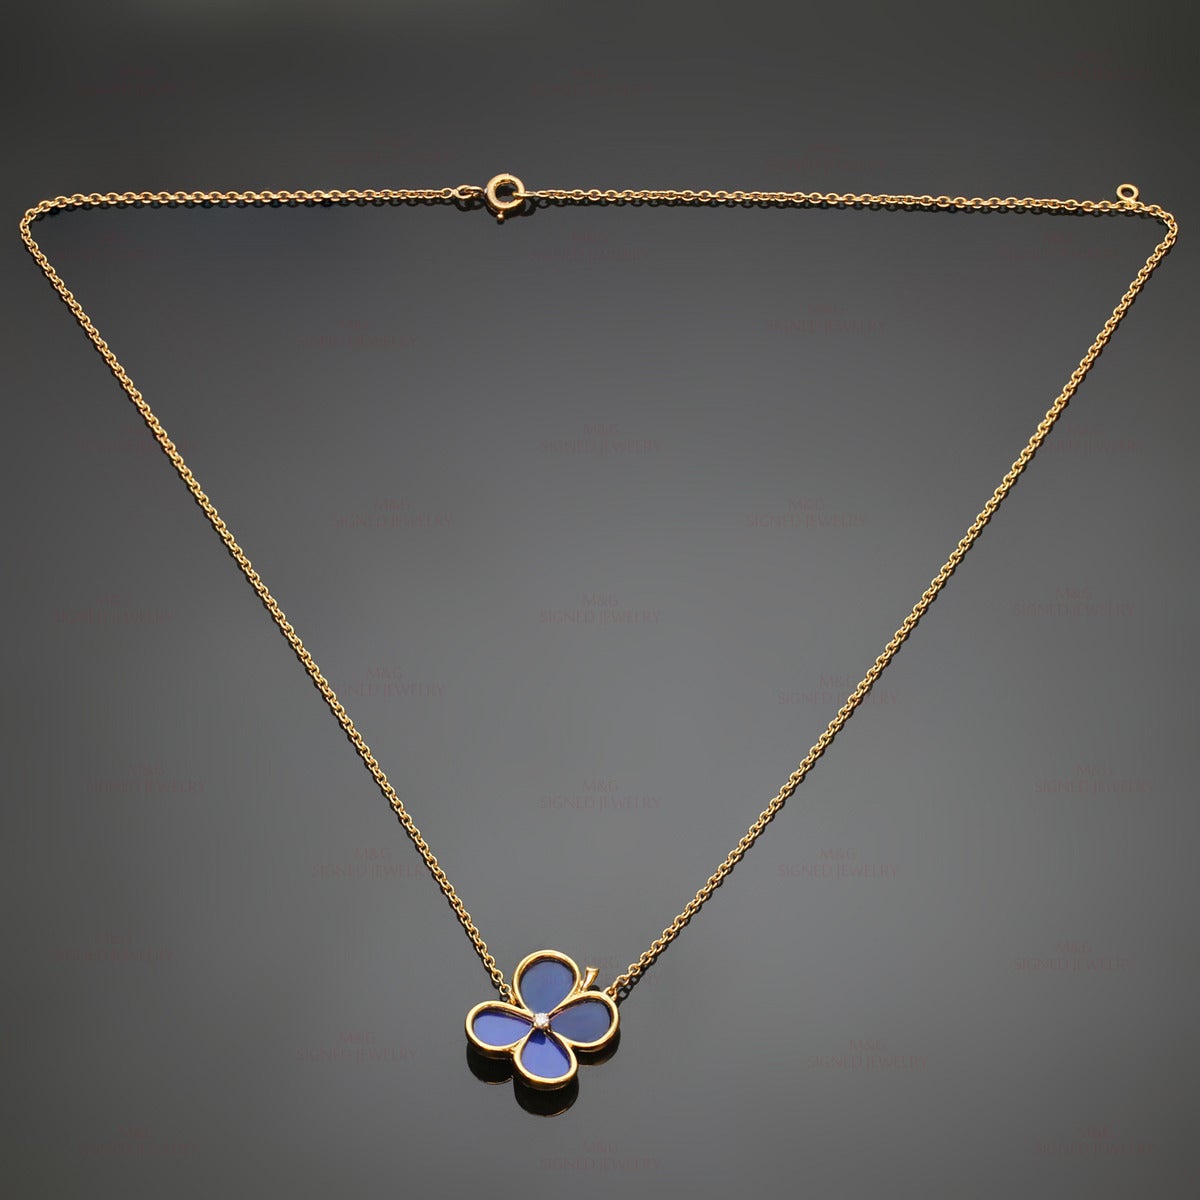 A stunning Van Cleef & Arpels clover necklace from the classic Vintage Alhambra collection. Made in 18k yellow gold and featuring Lapis Lazuli petals and a sparkling solitaire brilliant-cut diamond of an estimated 0.03 carats. France circa 1973.